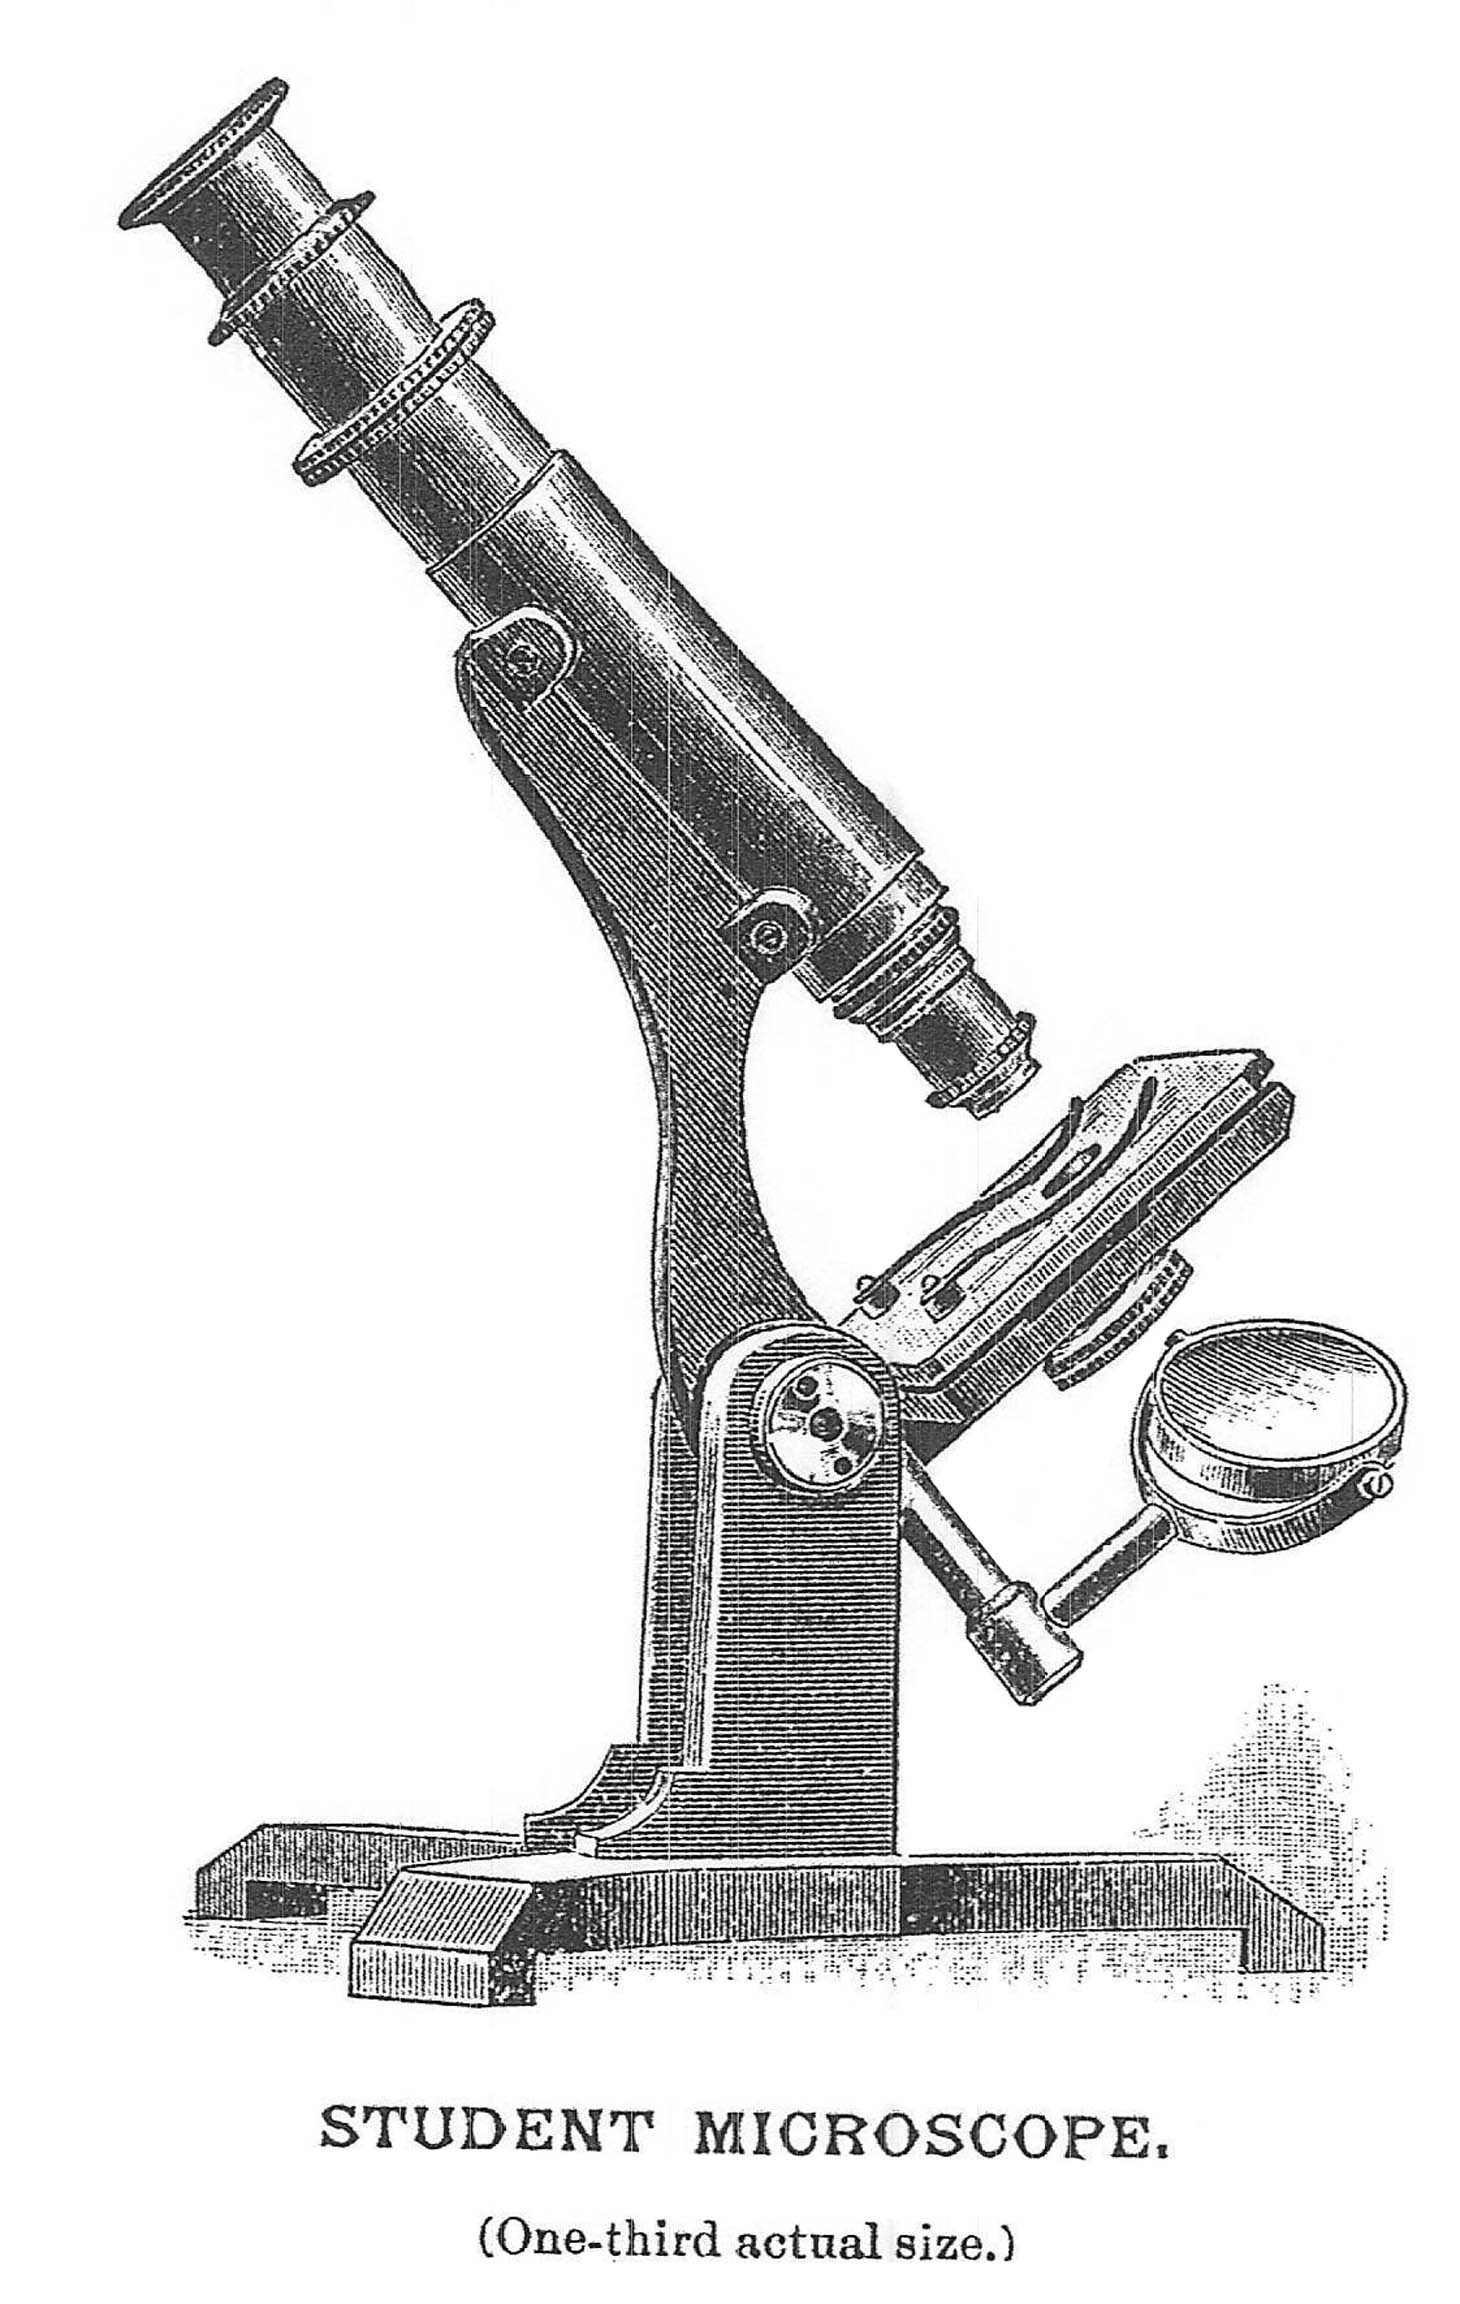 final form of Bulloch student microscope